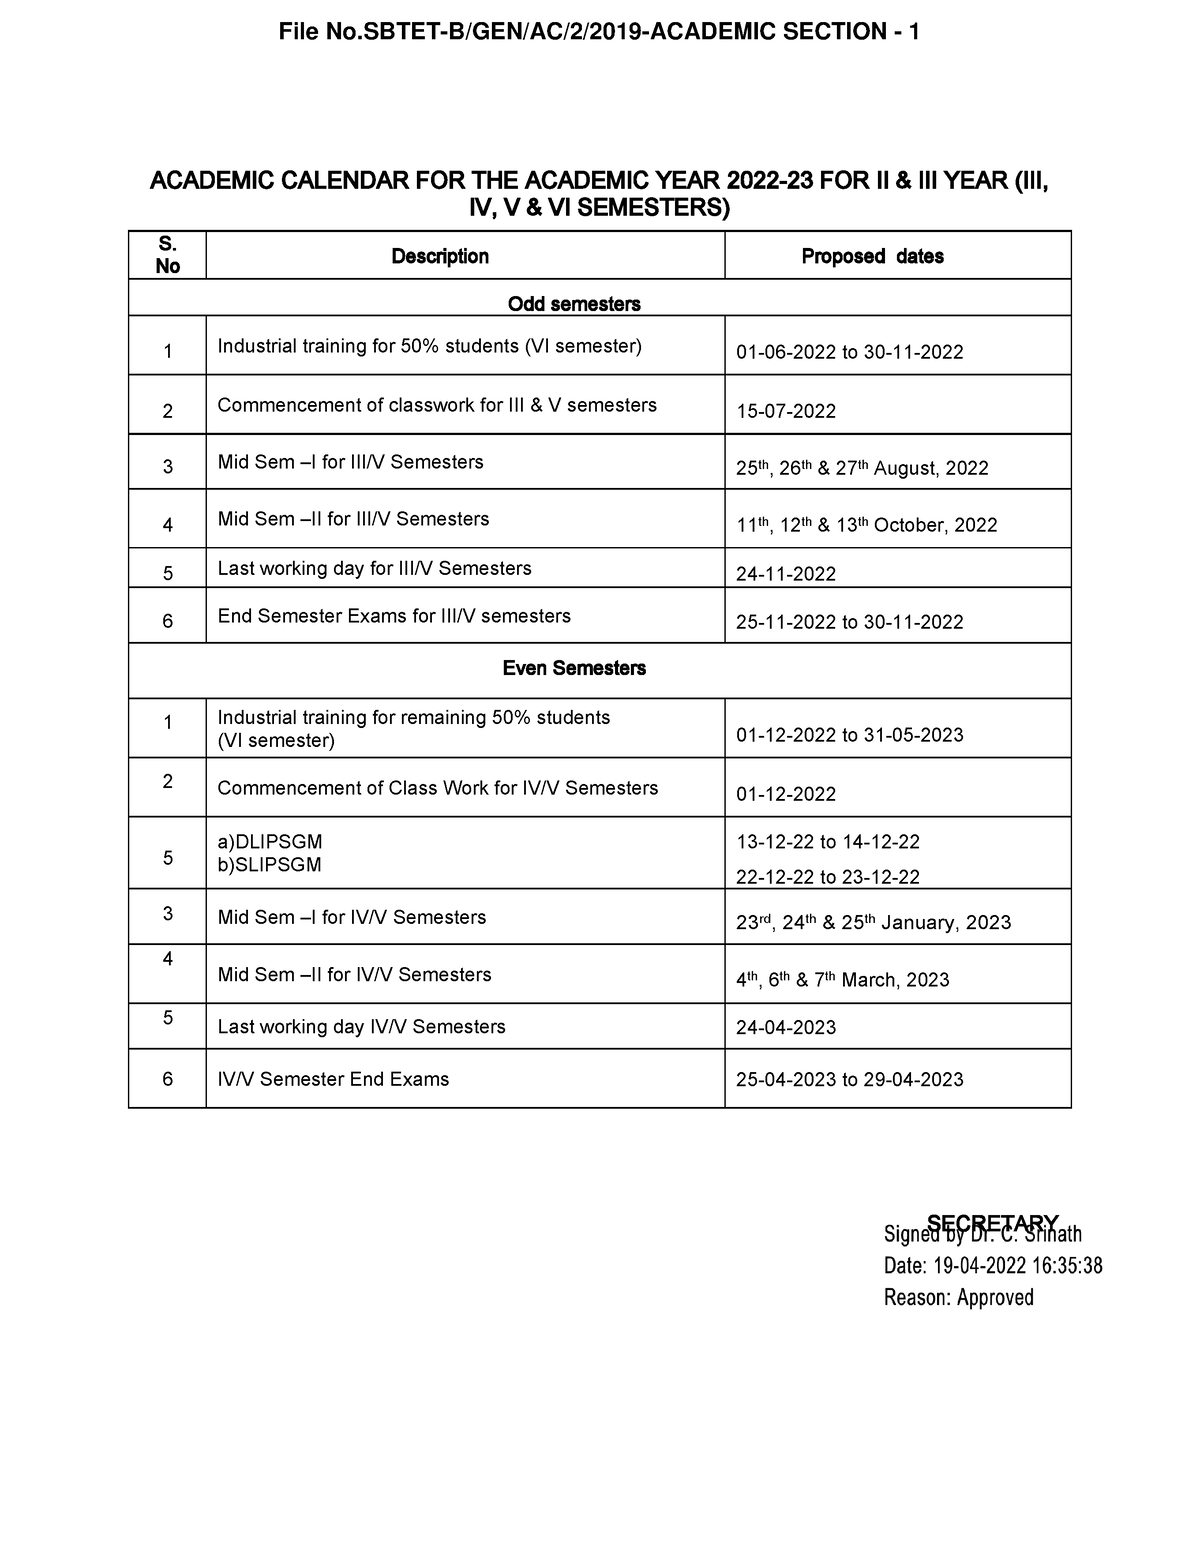 Academic Calender for the A.y. 202223 ACADEMIC CALENDAR FOR THE